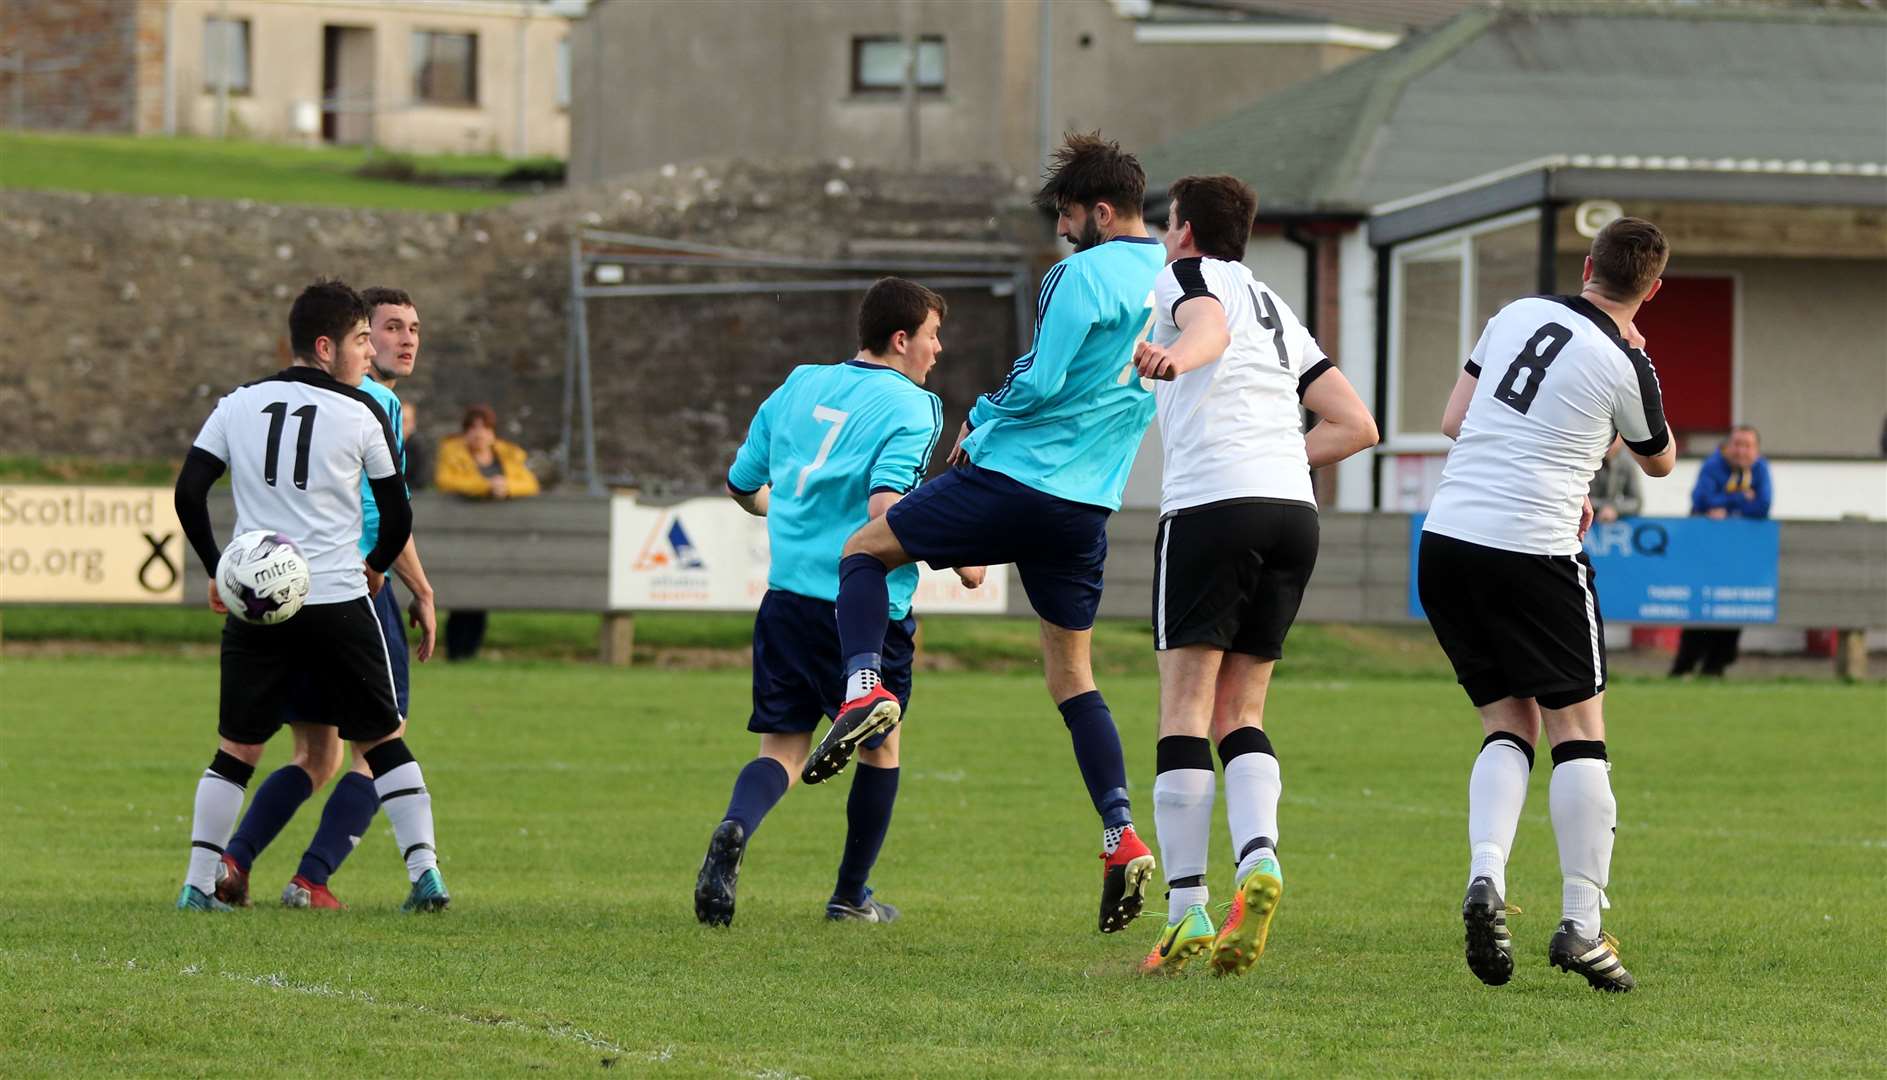 Thurso Swifts (white shirts) met Wick Groats earlier in the season but tonight's Eain Mackintosh Cup tie will not go ahead after Swifts were unable to raise a team. Wick Groats have been awarded a bye into the next round. Picture: James Gunn